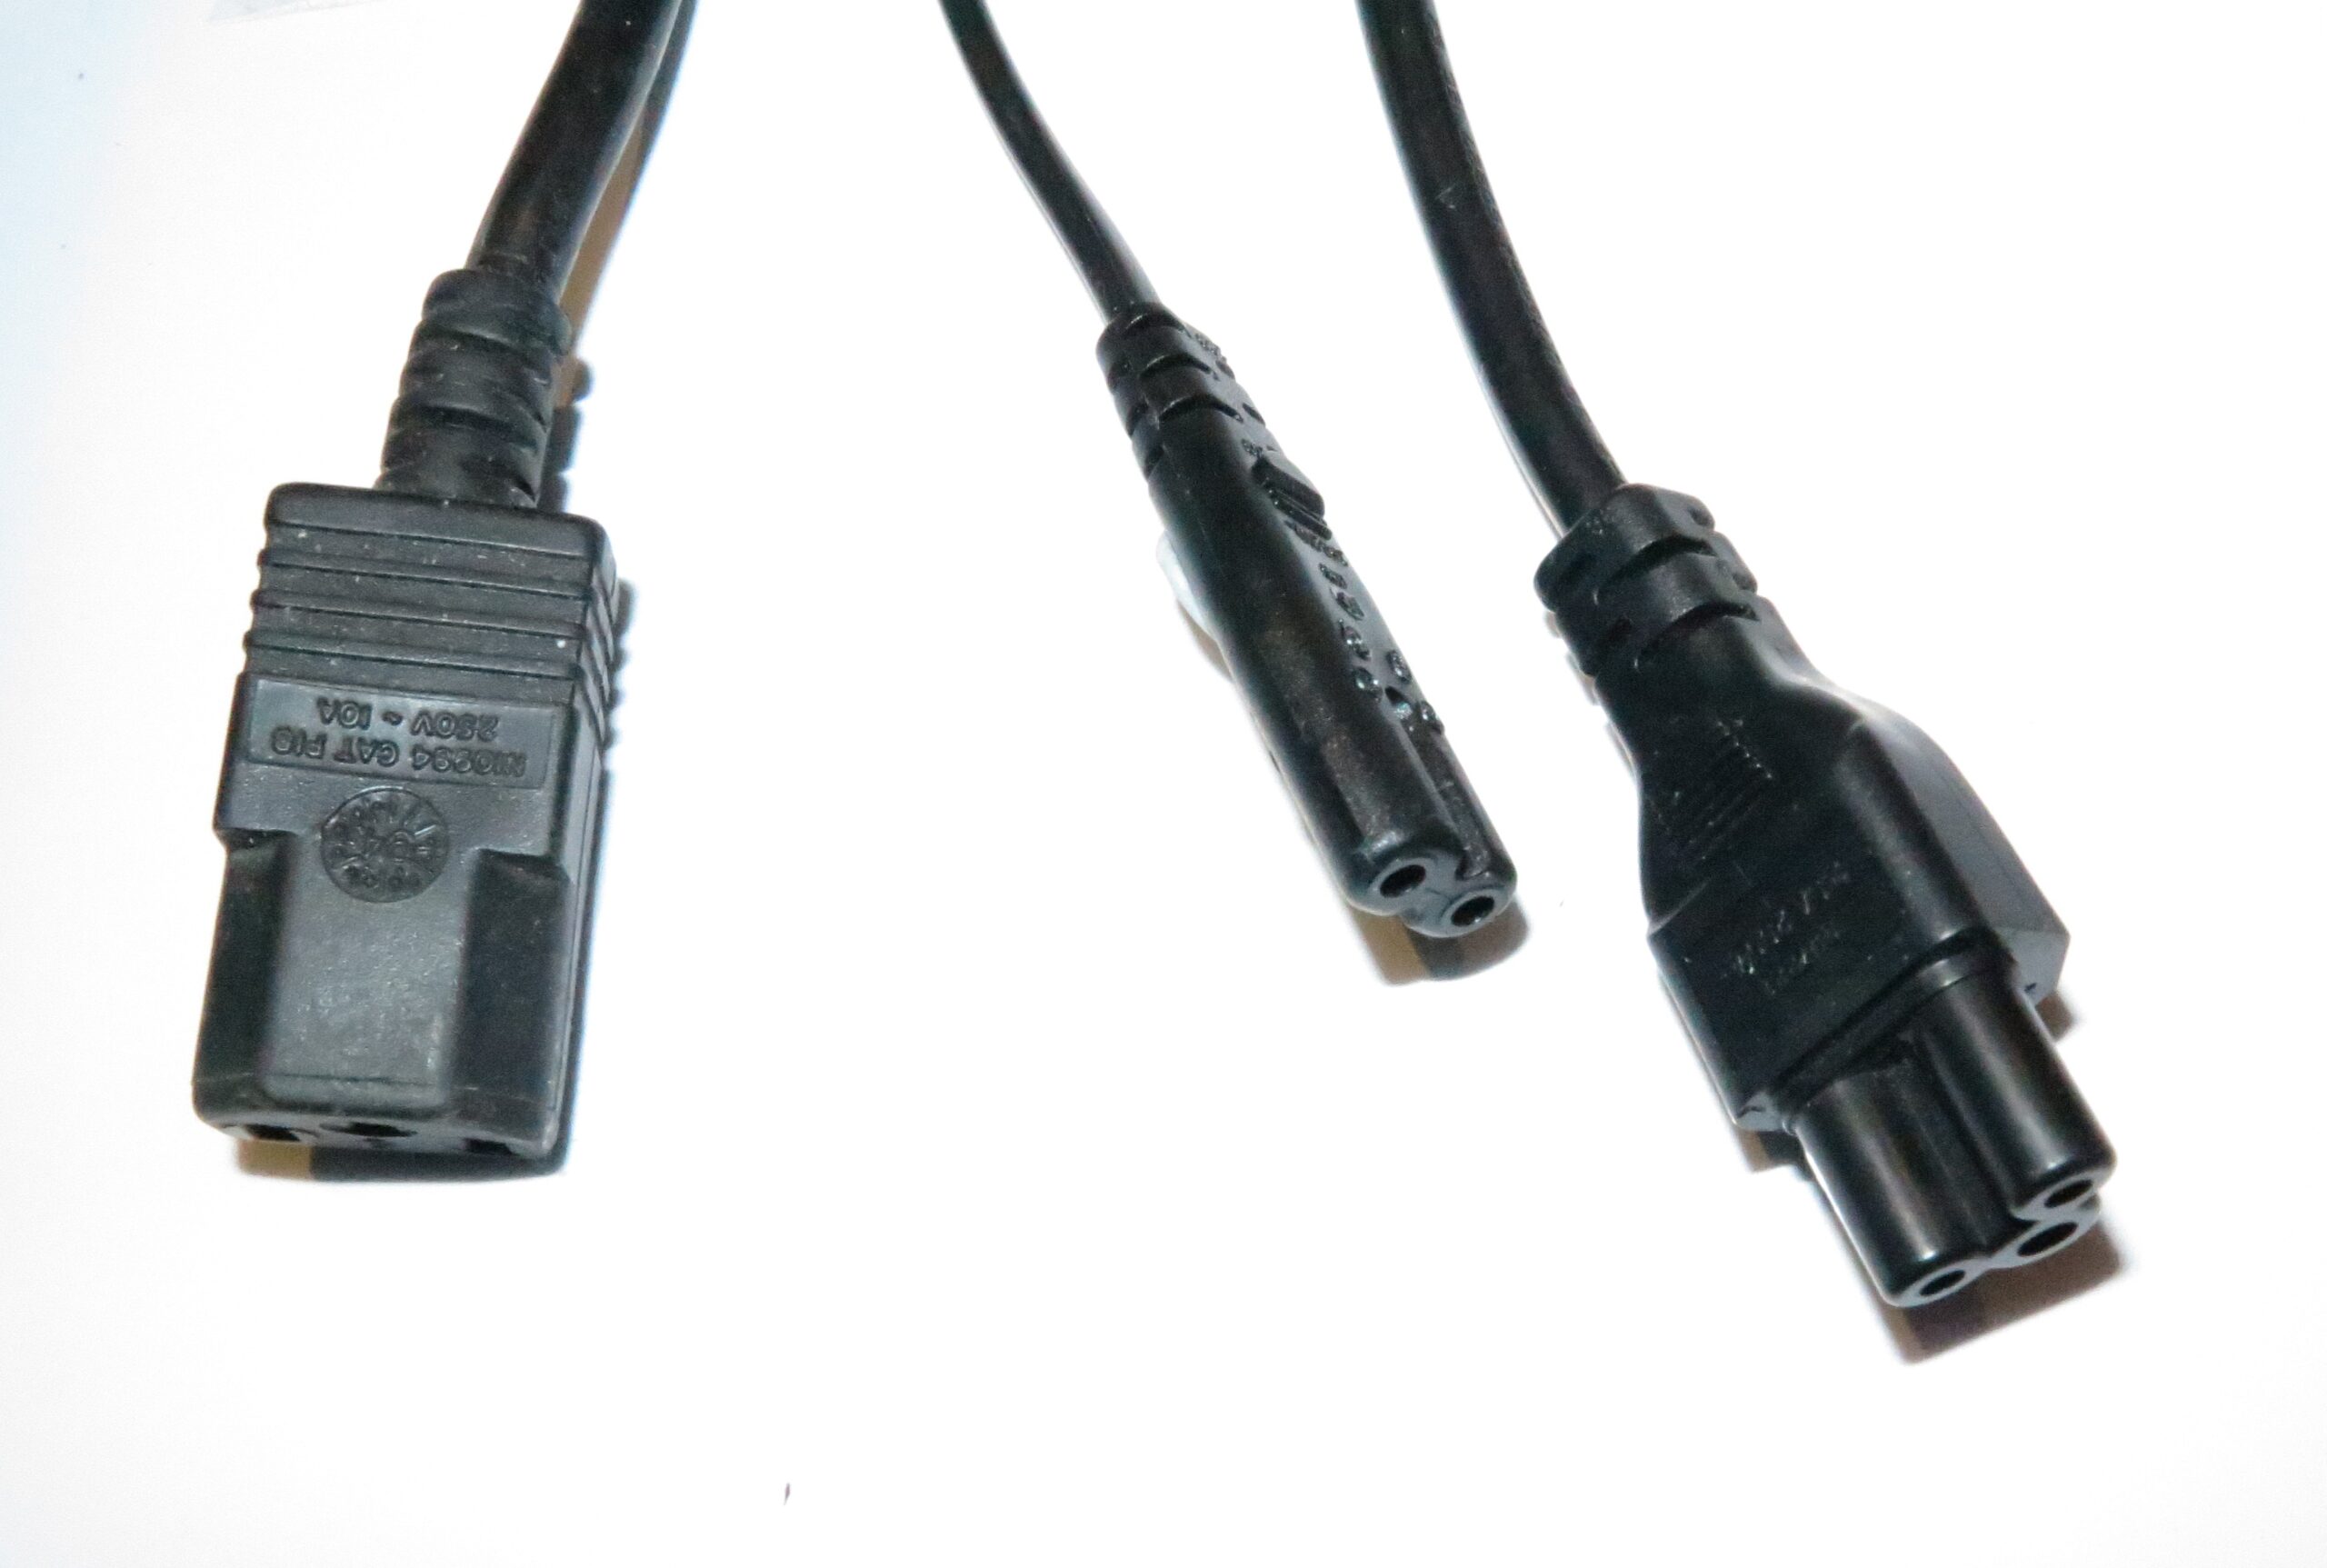 Why should I prefer a charger or power supply to use IEC-standard AC connections